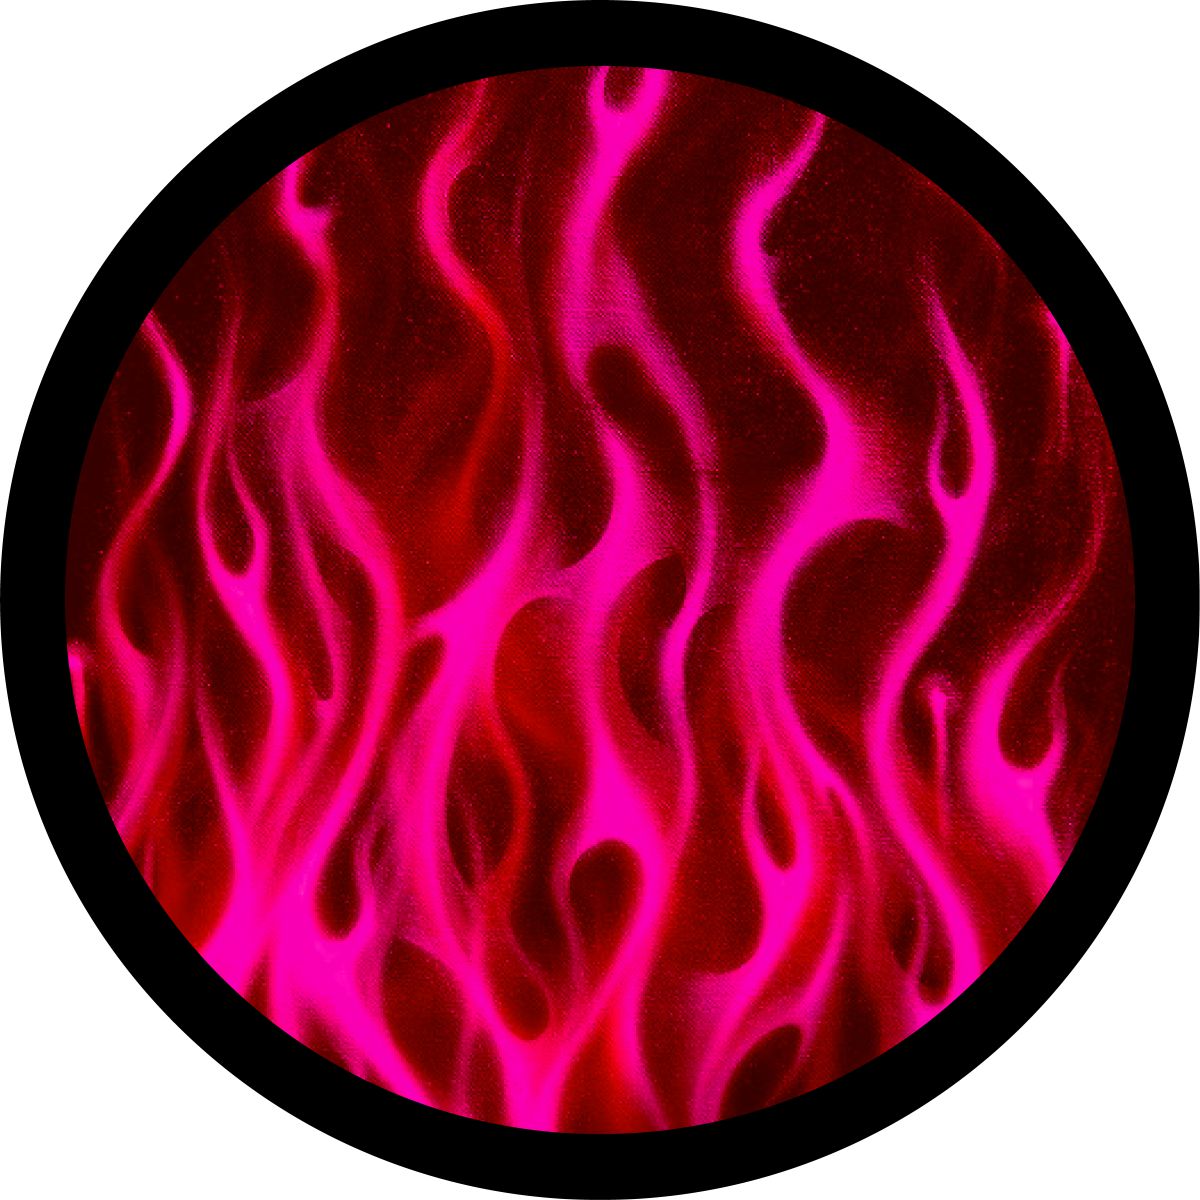 Hot Pink Flame, Pink Spare Tire Cover Designs for Jeep, Bronco, RV, Campers, and more